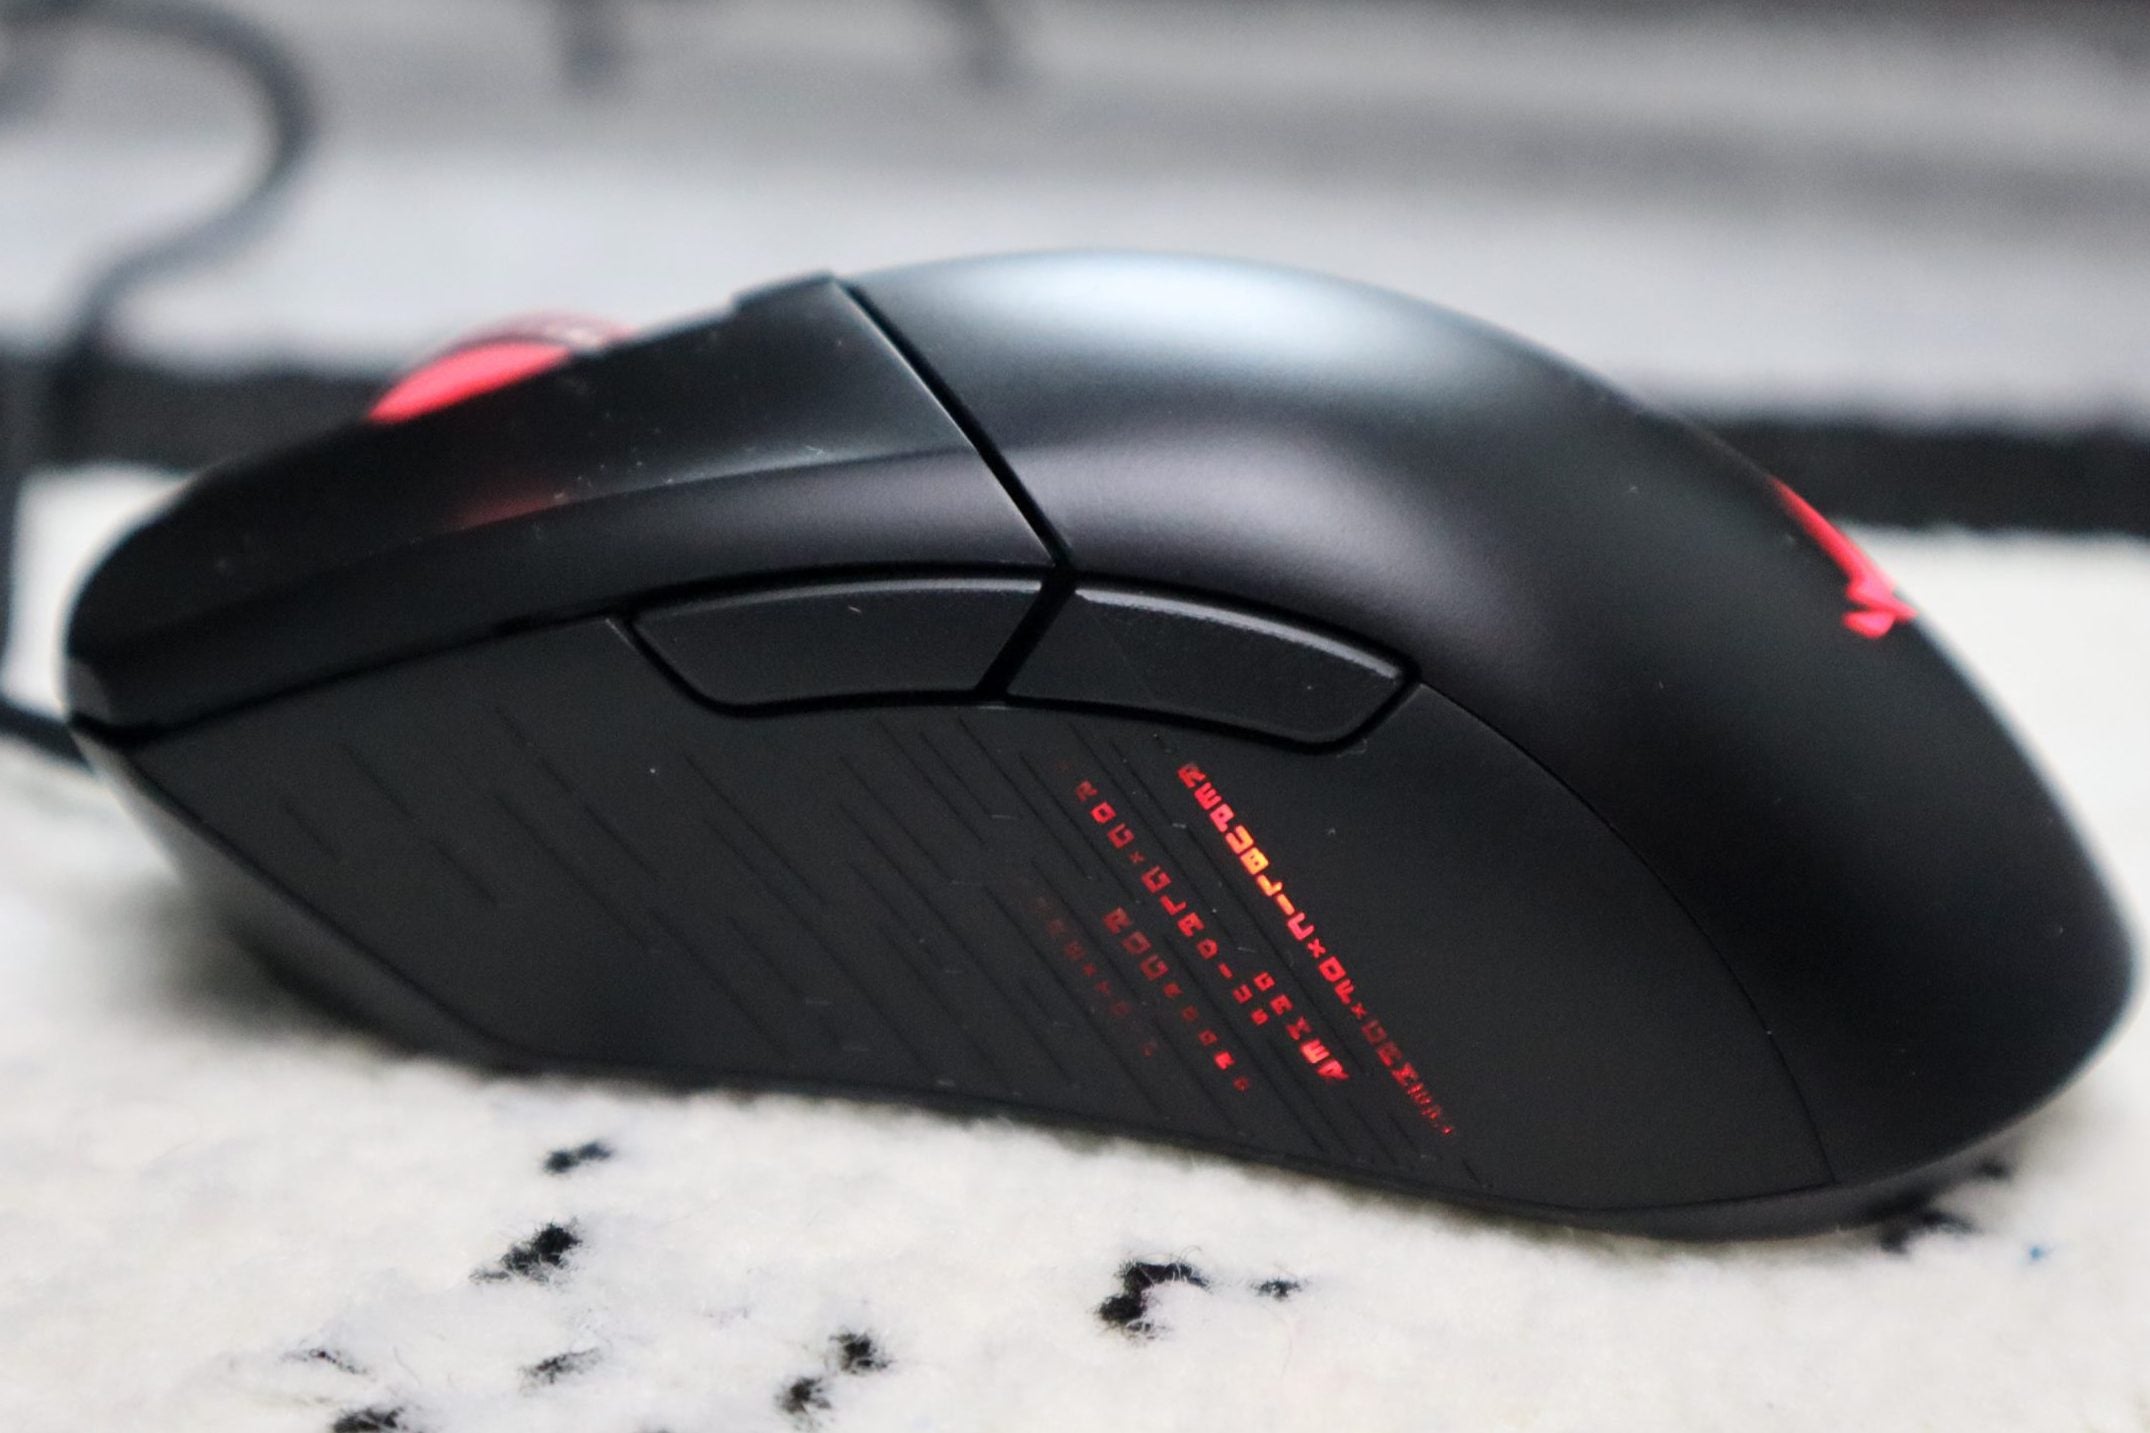 Asus ROG Gladius III show on the side, with two buttons